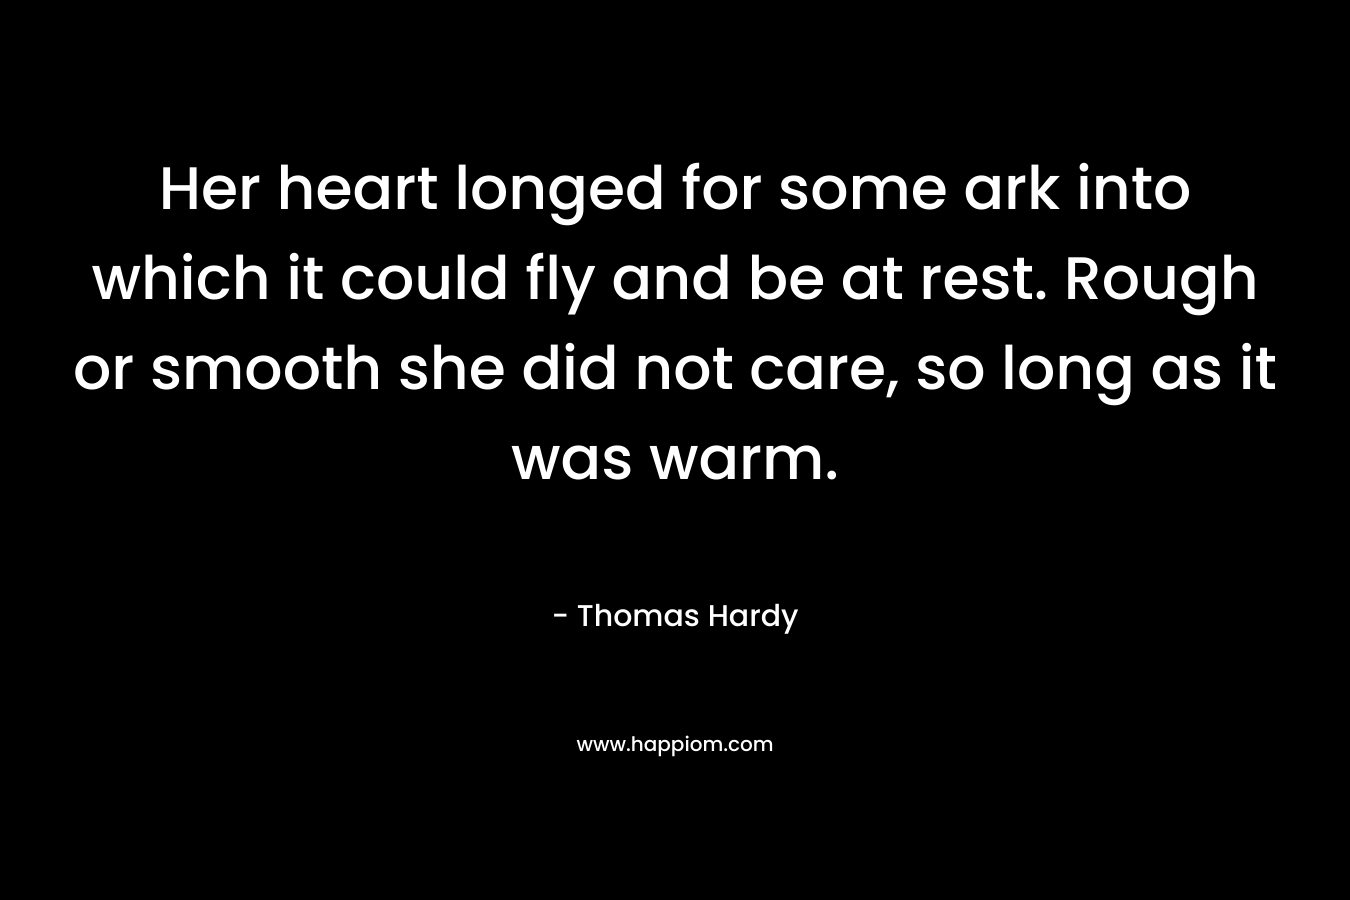 Her heart longed for some ark into which it could fly and be at rest. Rough or smooth she did not care, so long as it was warm. – Thomas Hardy